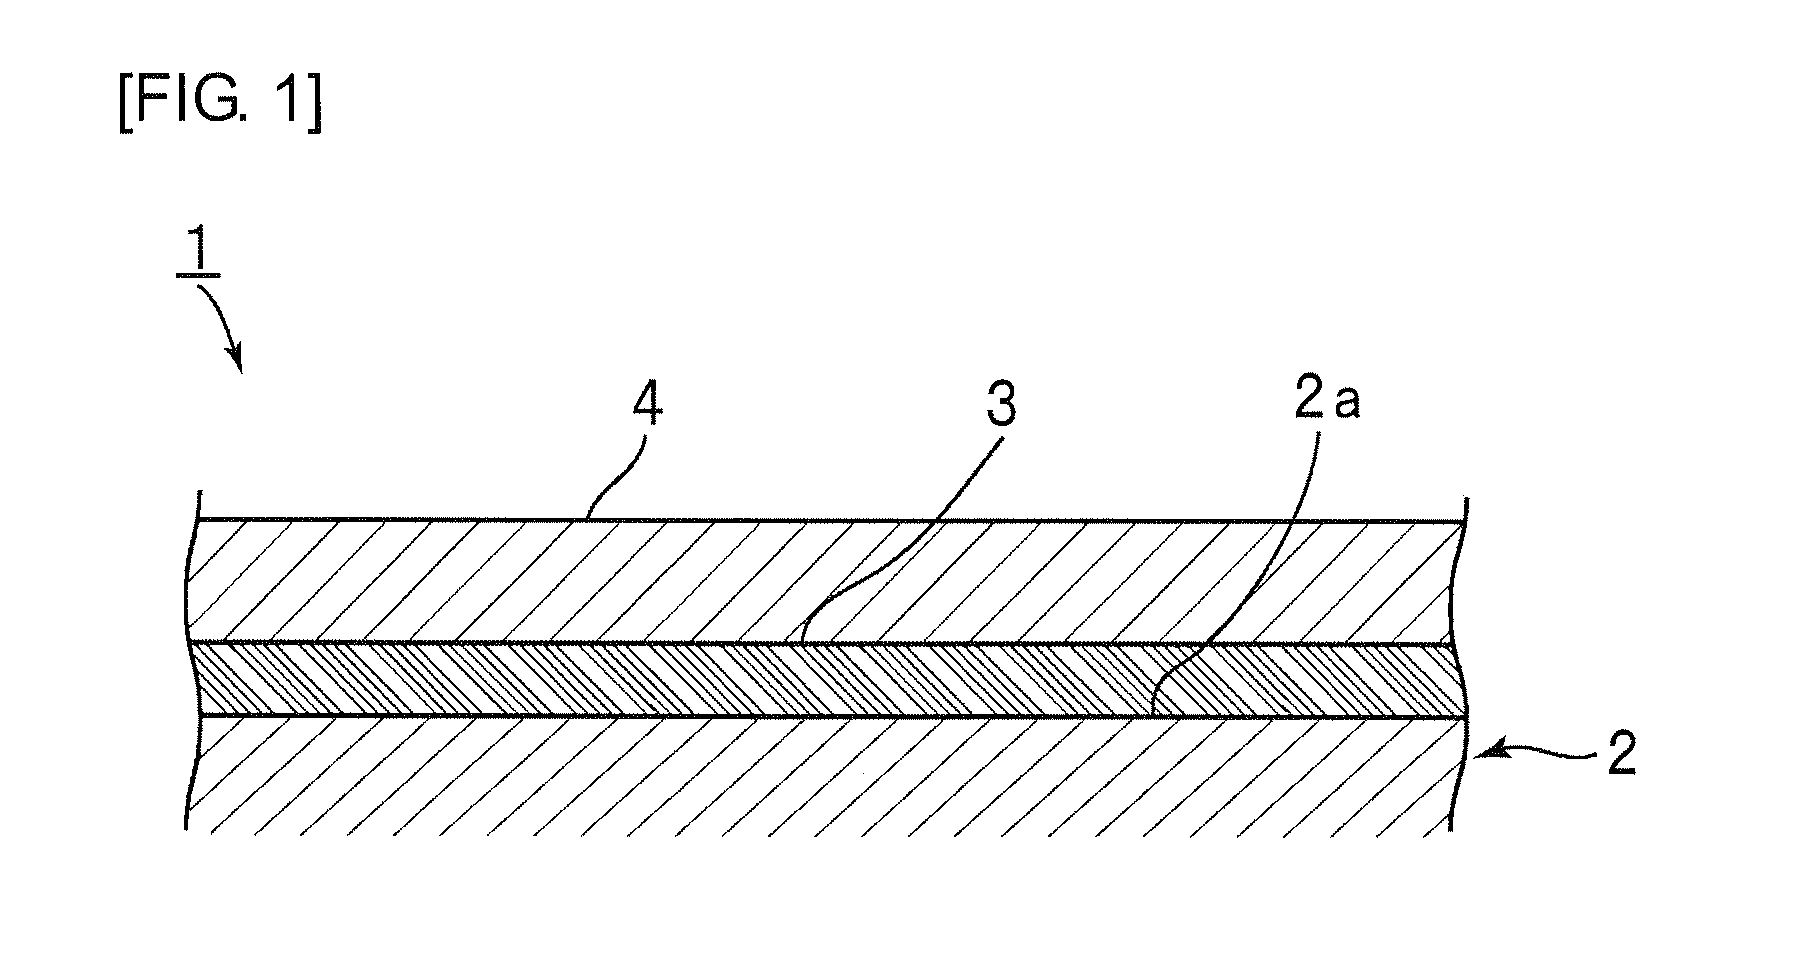 Insulating sheet and multilayer structure